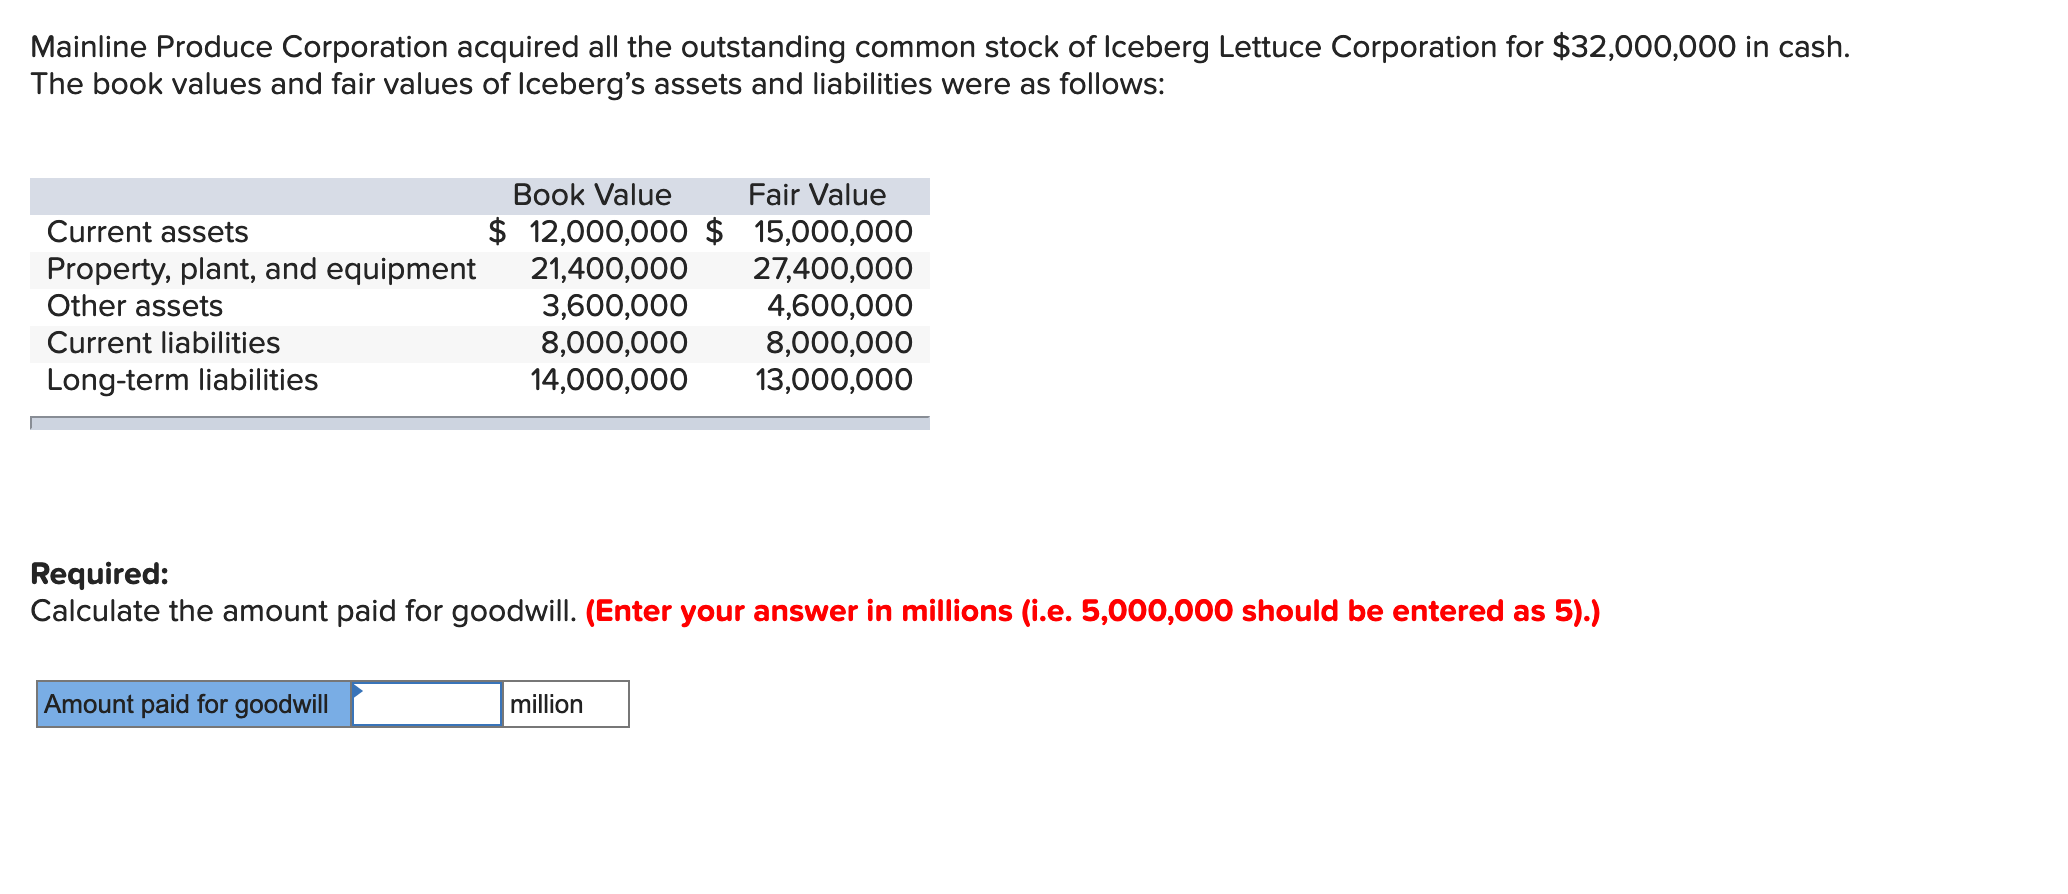 Mainline Produce Corporation acquired all the outstanding common stock of Iceberg Lettuce Corporation for $32,000,000 in cash.
The book values and fair values of Iceberg's assets and liabilities were as follows:
Book Value
Fair Value
$ 12,000,000 $ 15,000,000
21,400,000
3,600,000
8,000,000
14,000,000
Current assets
Property, plant, and equipment
Other assets
27,400,000
4,600,000
8,000,000
13,000,000
Current liabilities
Long-term liabilities
Required:
Calculate the amount paid for goodwill. (Enter your answer in millions (i.e. 5,000,000 should be entered as 5).)
Amount paid for goodwill
million
